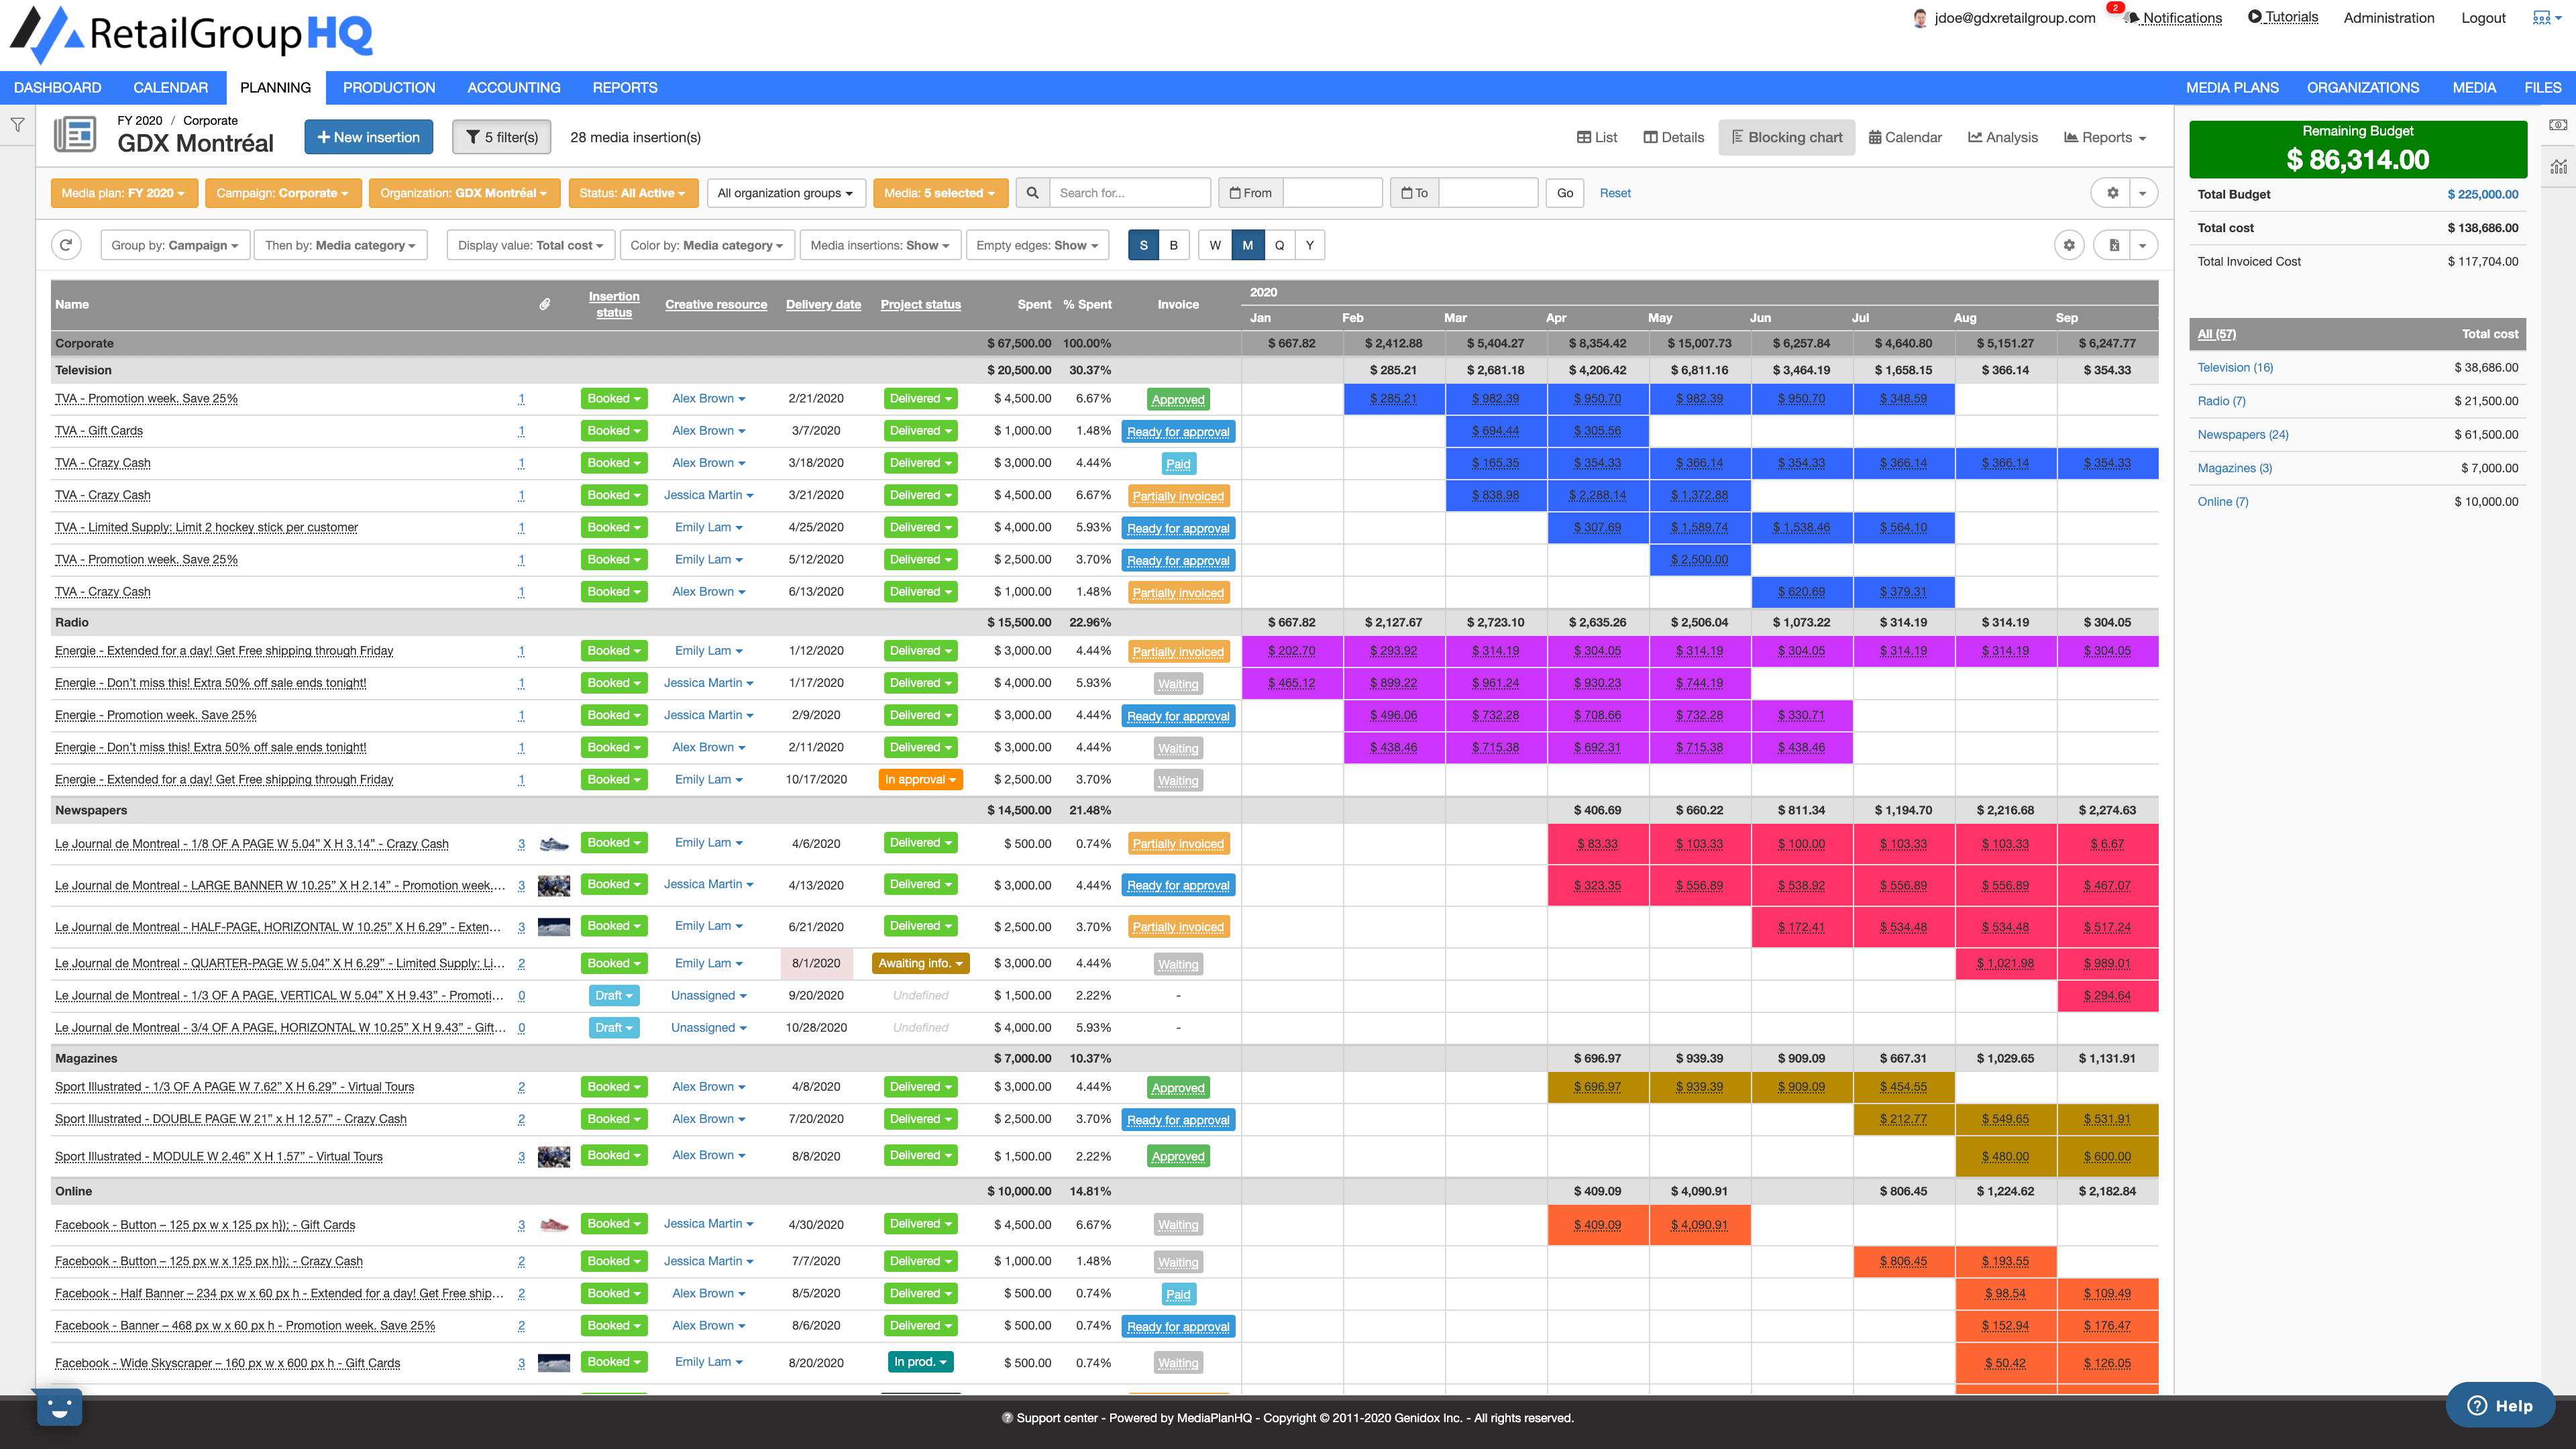 Media planning for when you outgrow spreadsheets | MediaPlanHQ